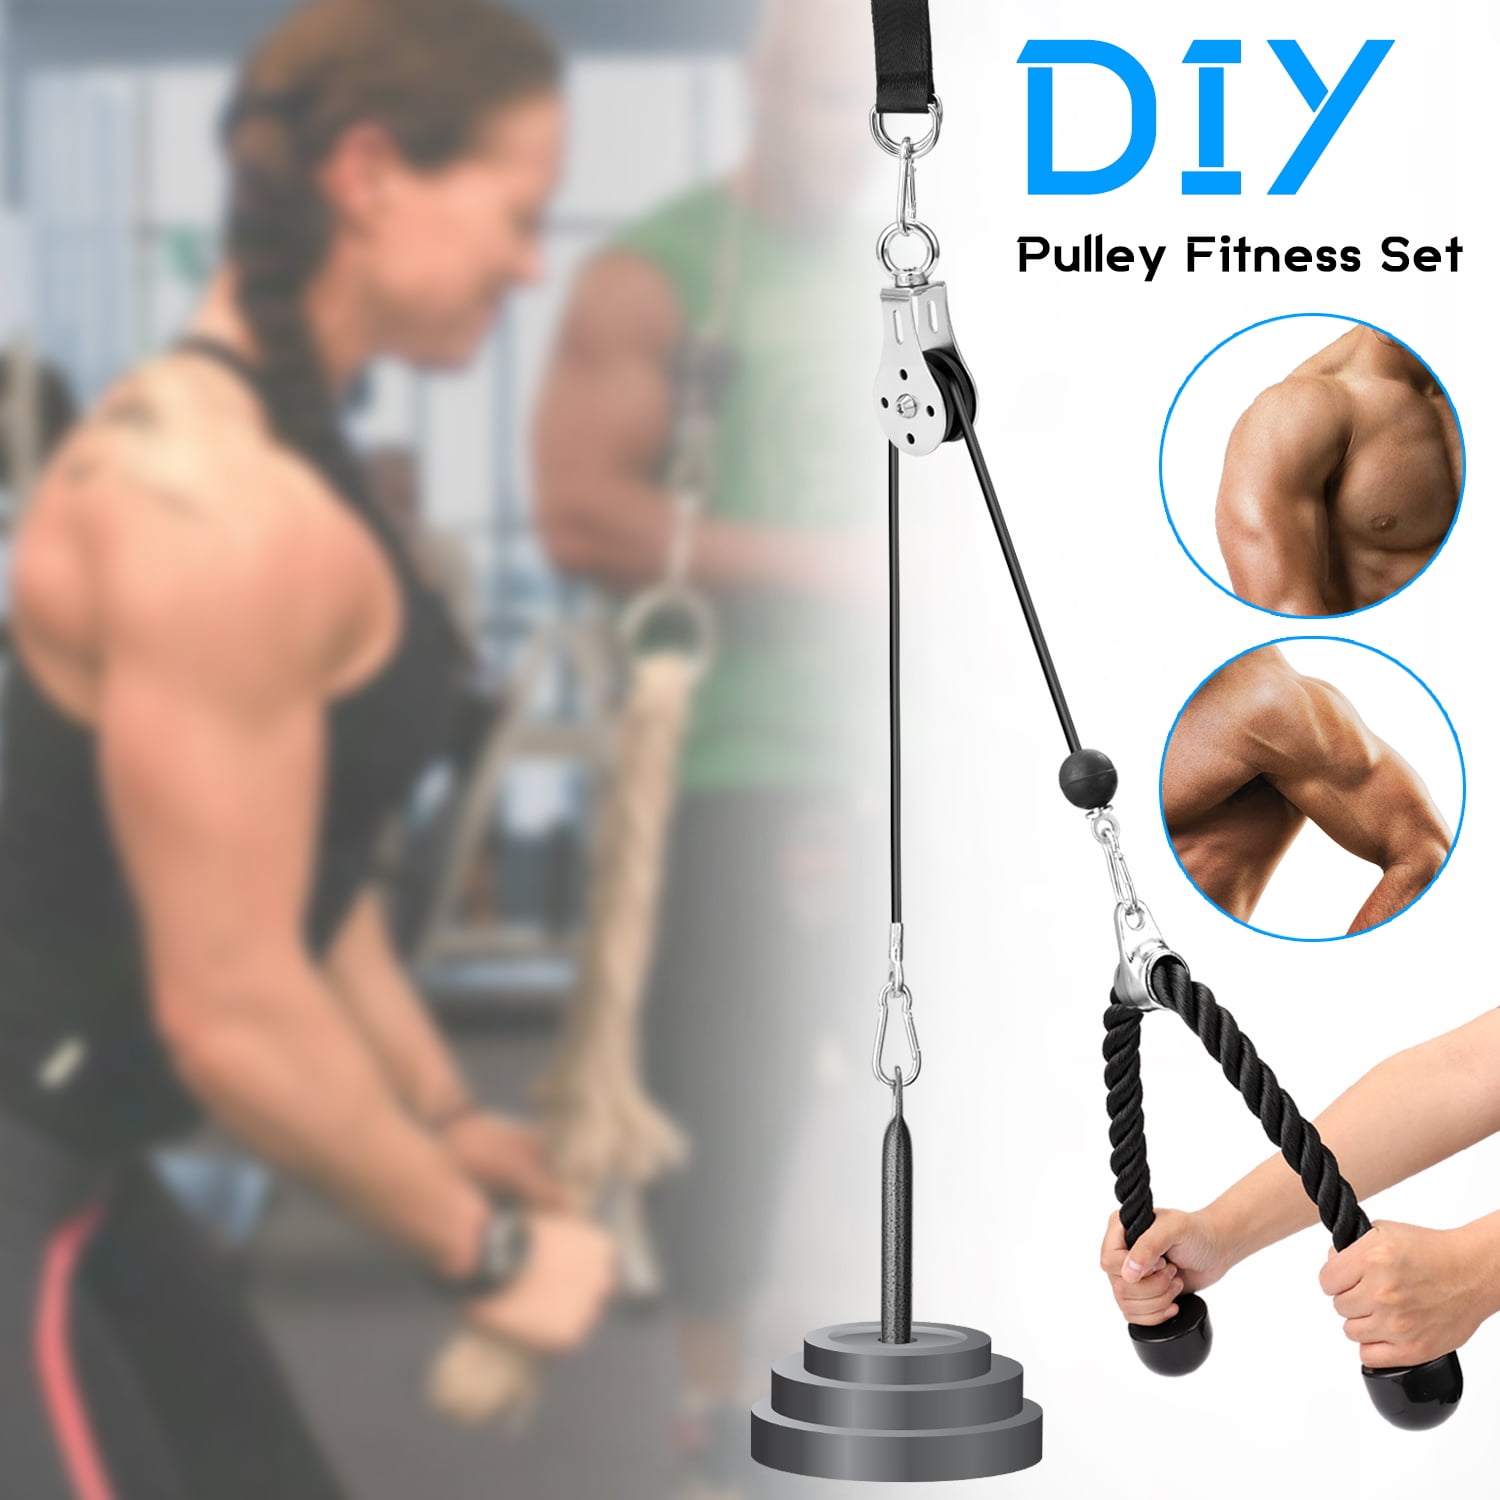 Details about   Fitness DIY Pulley Cable Machine Attachment System Arm Biceps Triceps Q7I6 